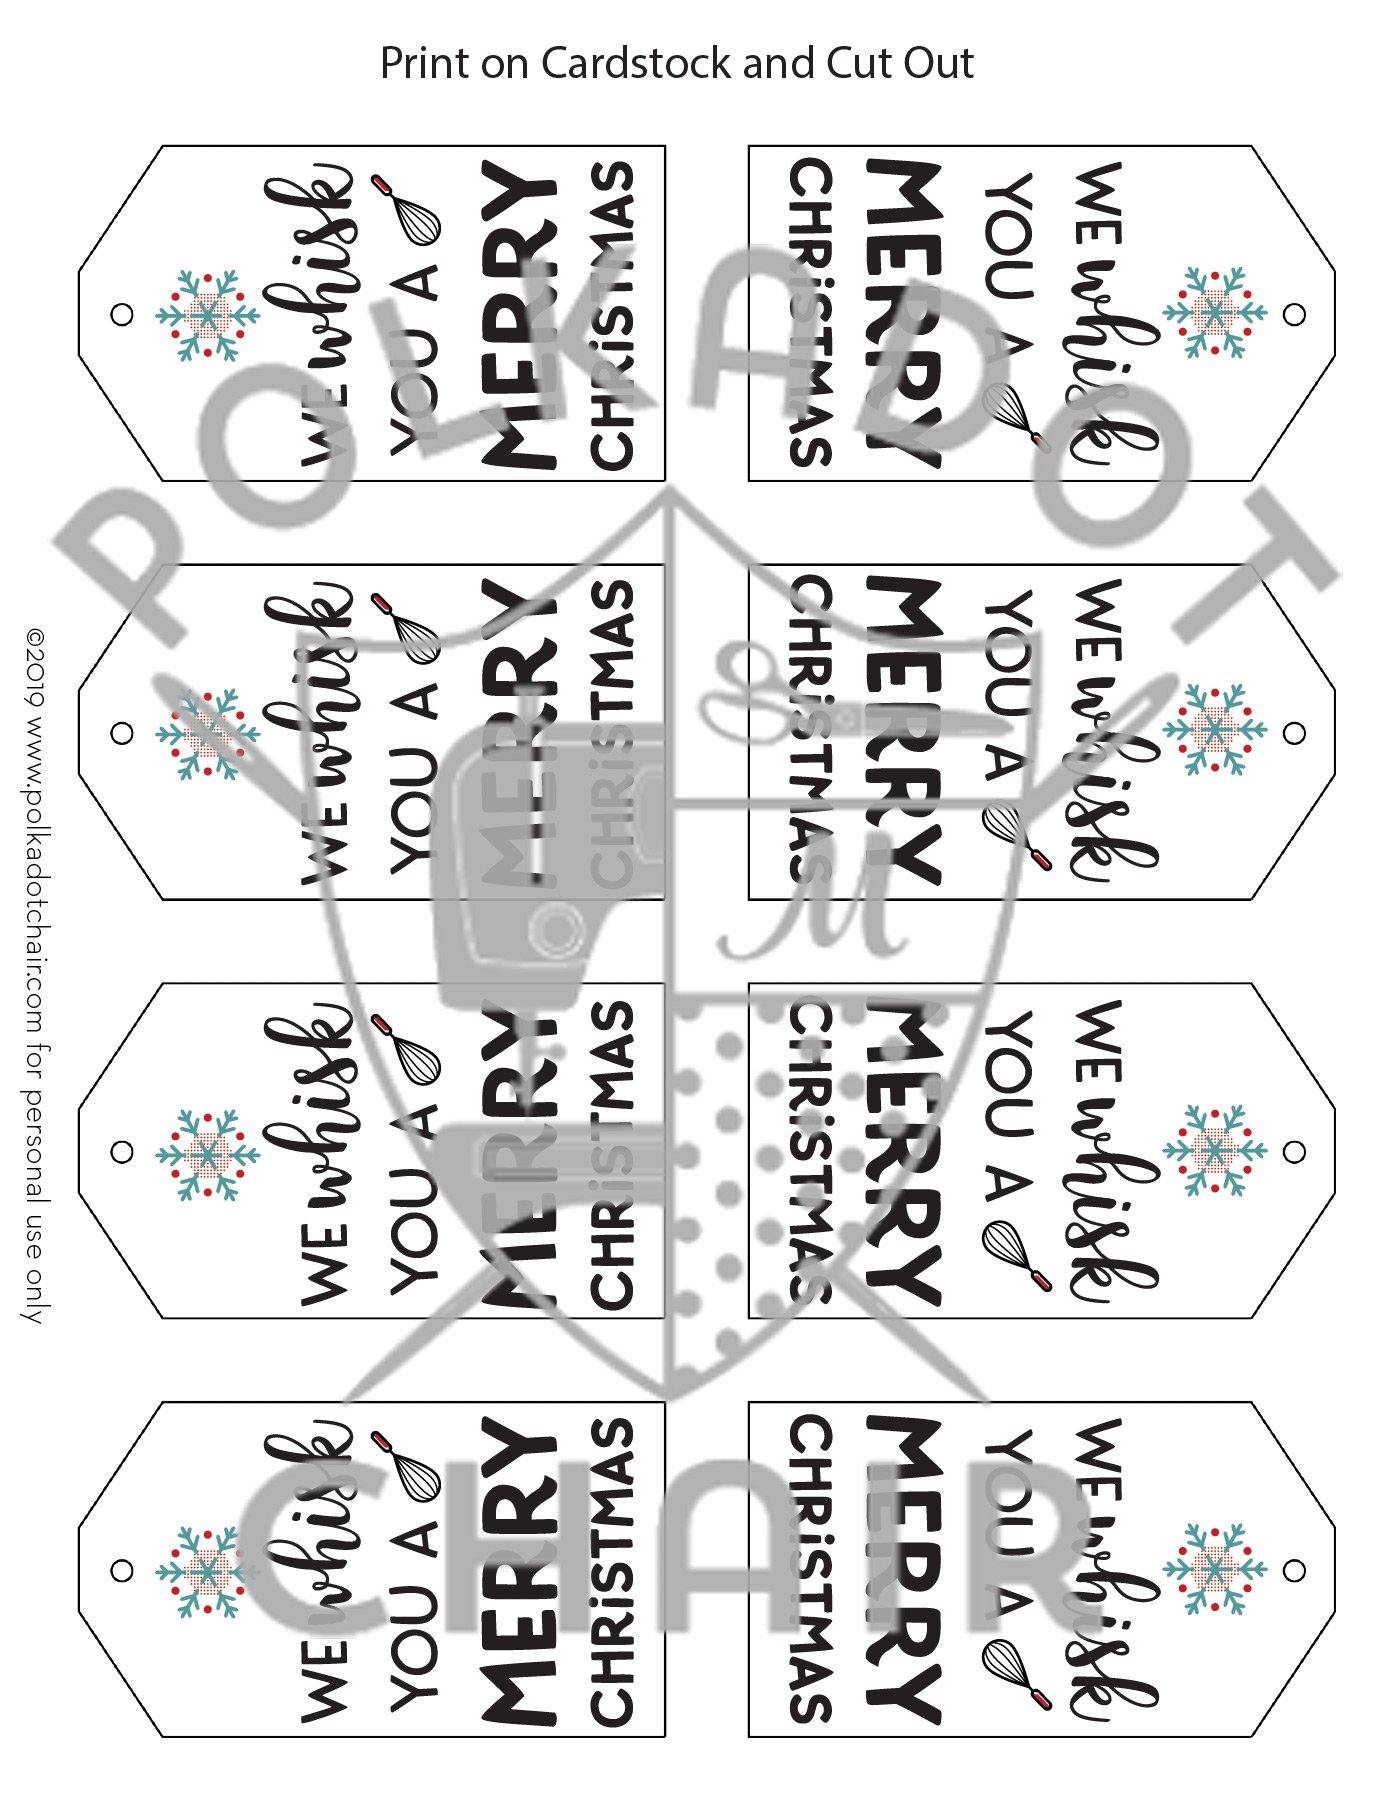 184 Free Printable Blank Gift Tags For DIY Recipes, Presents & Gift Bags